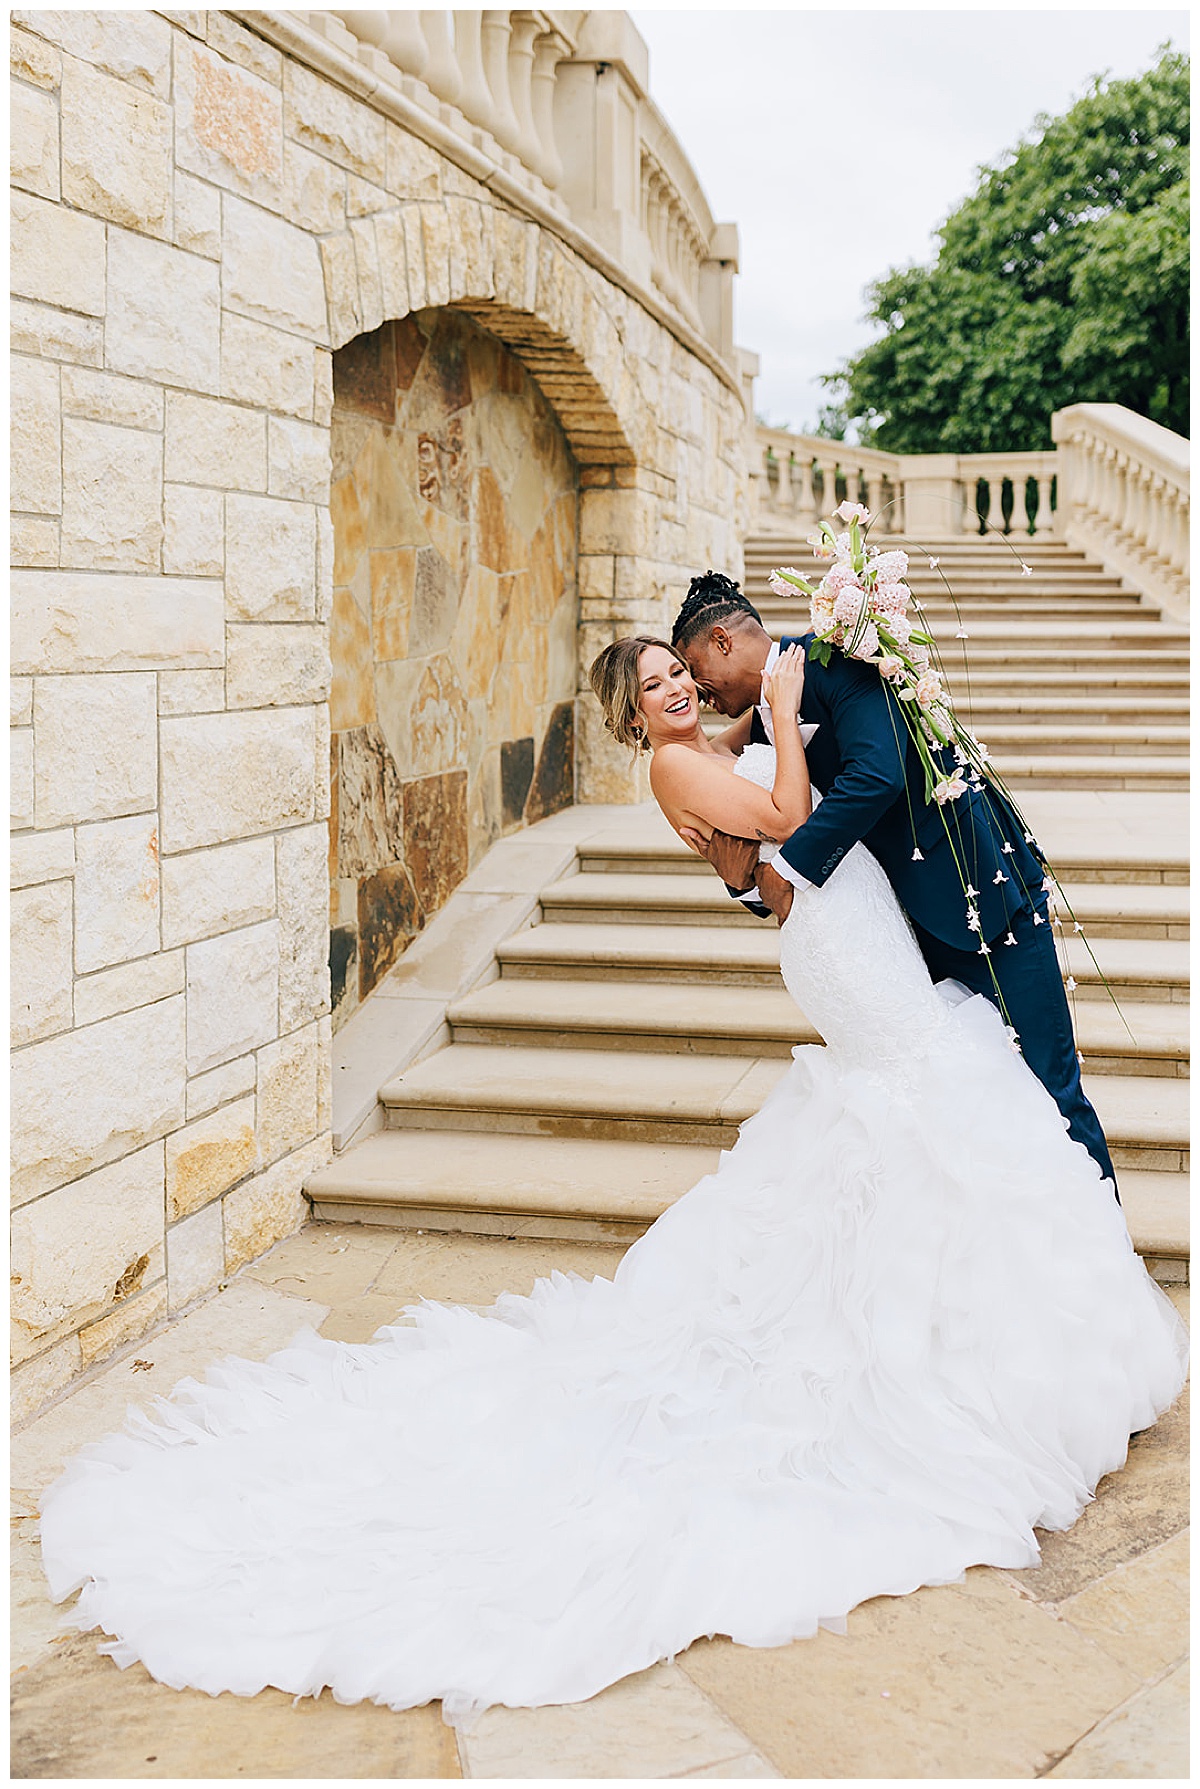 Man and woman dance together for Detroit Wedding Photographer 